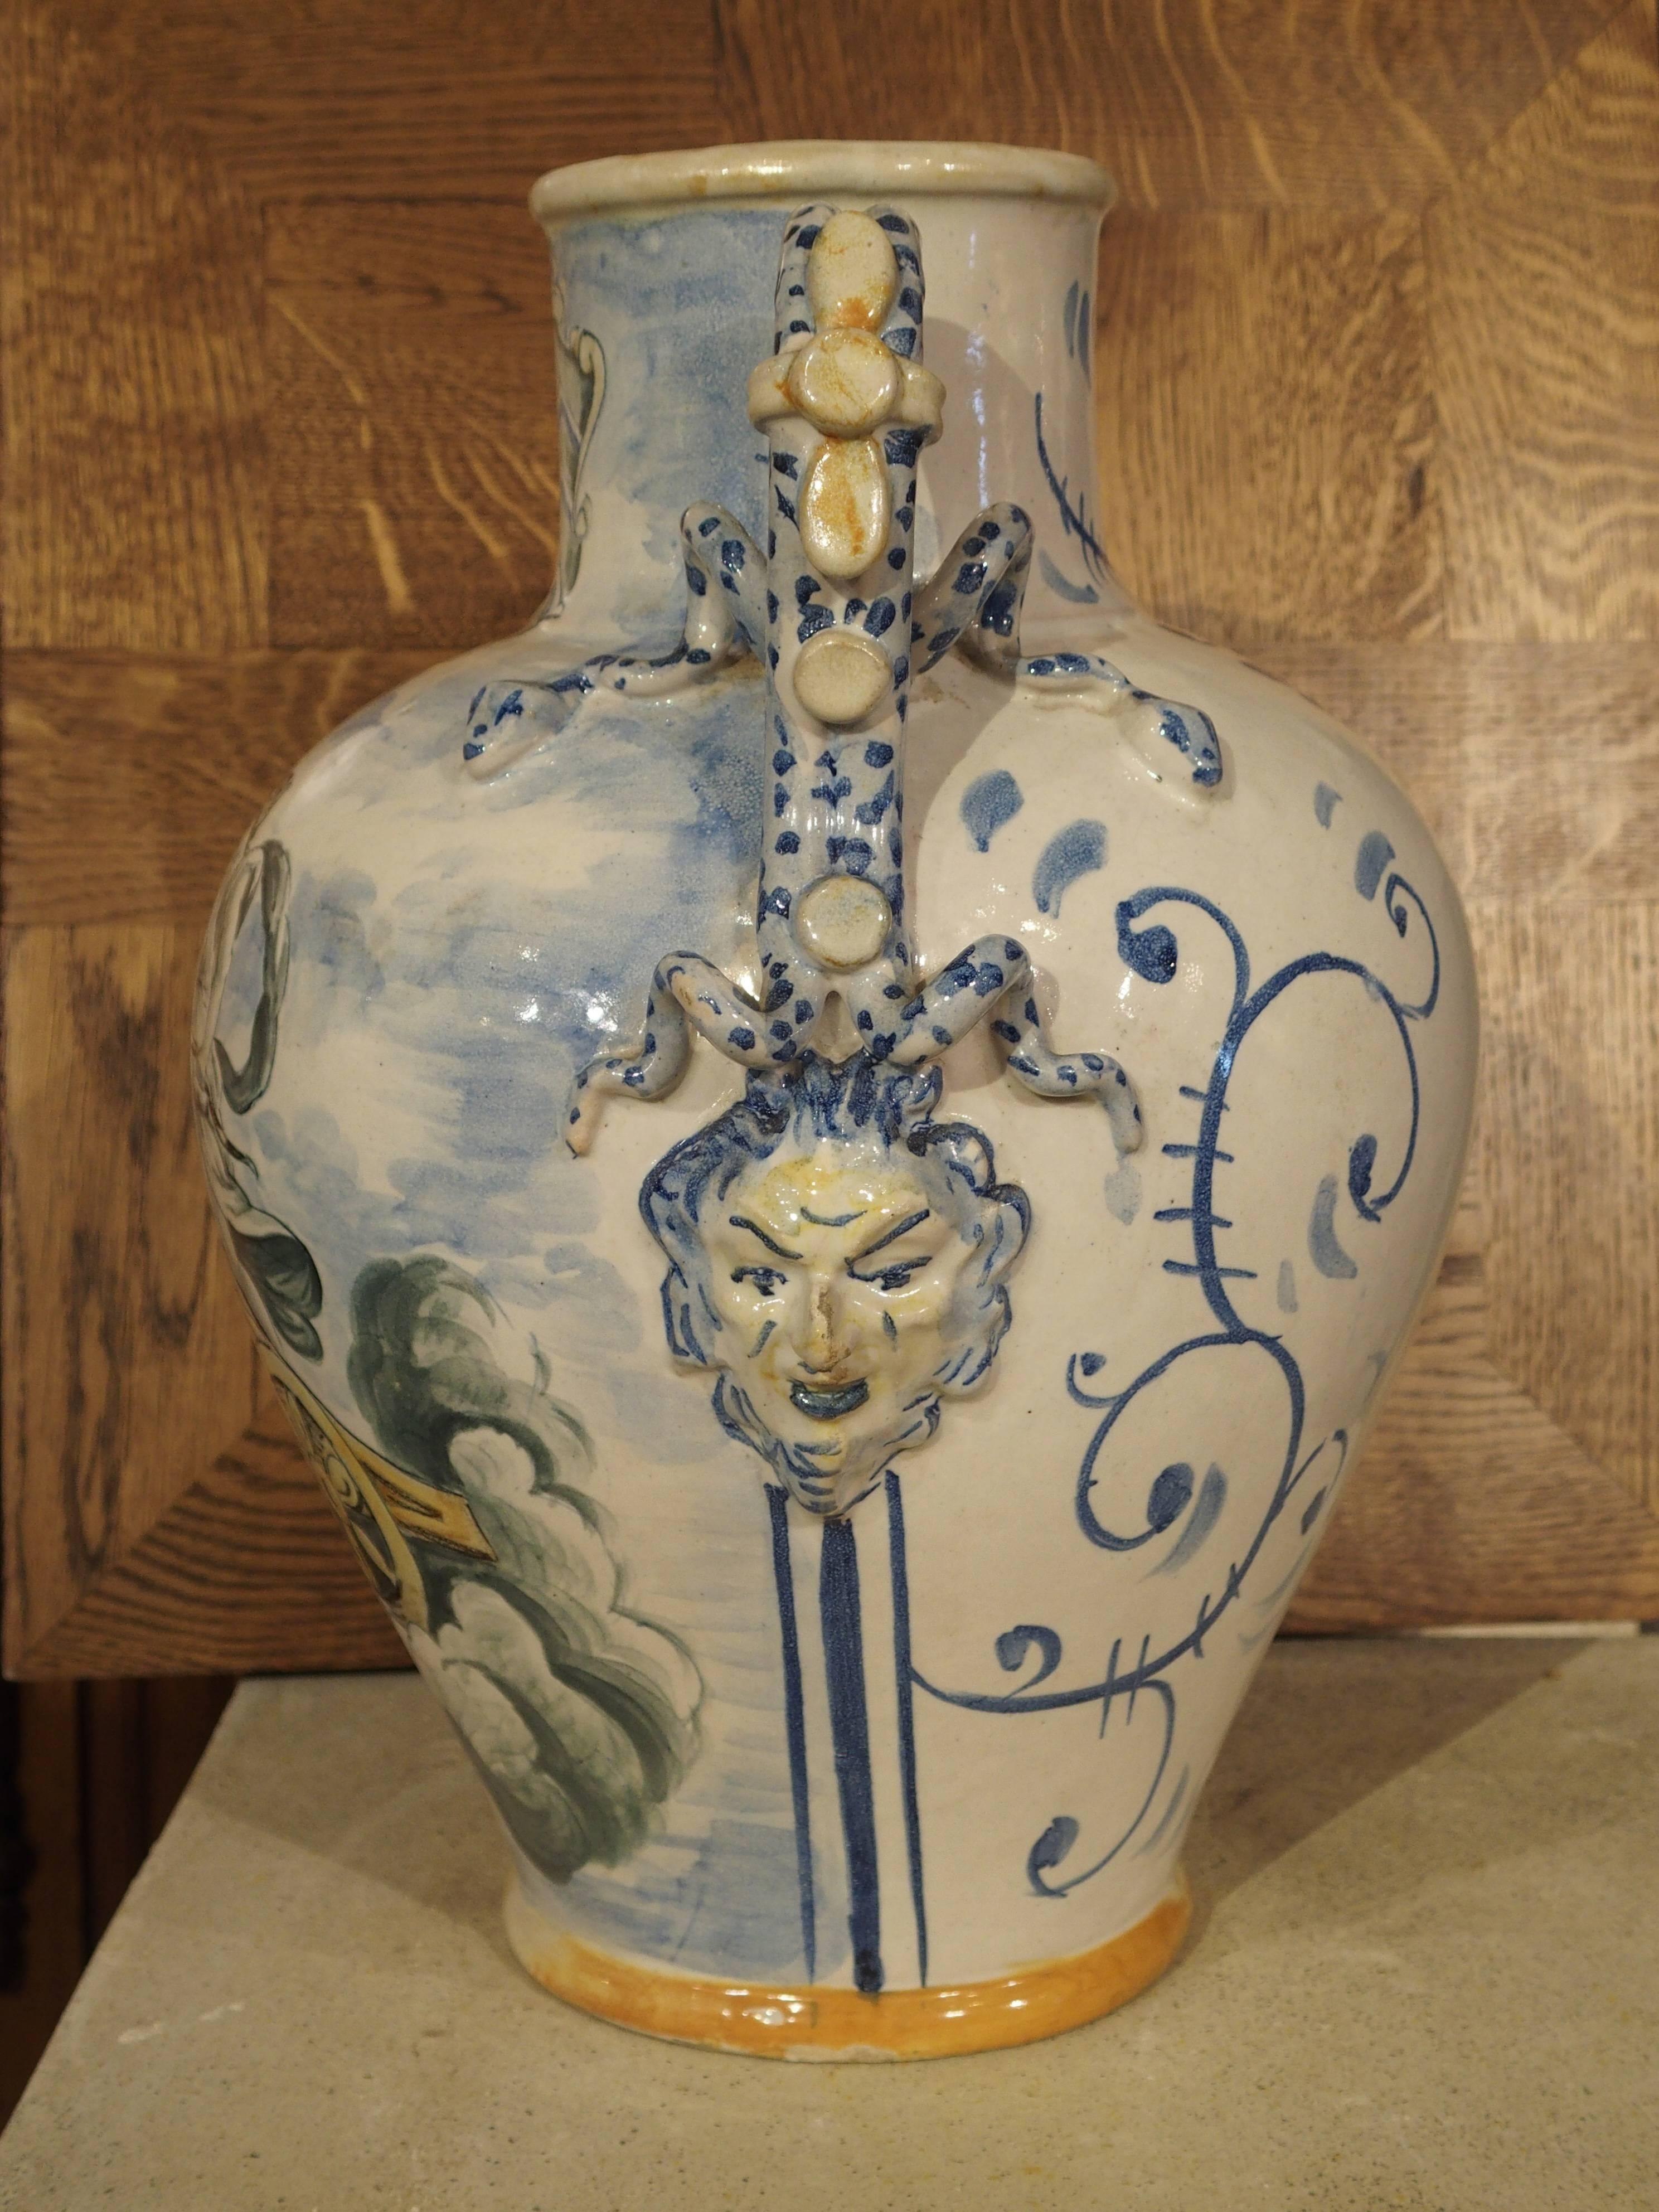 Hand-Painted Antique Majolica Urn from Italy, 19th Century